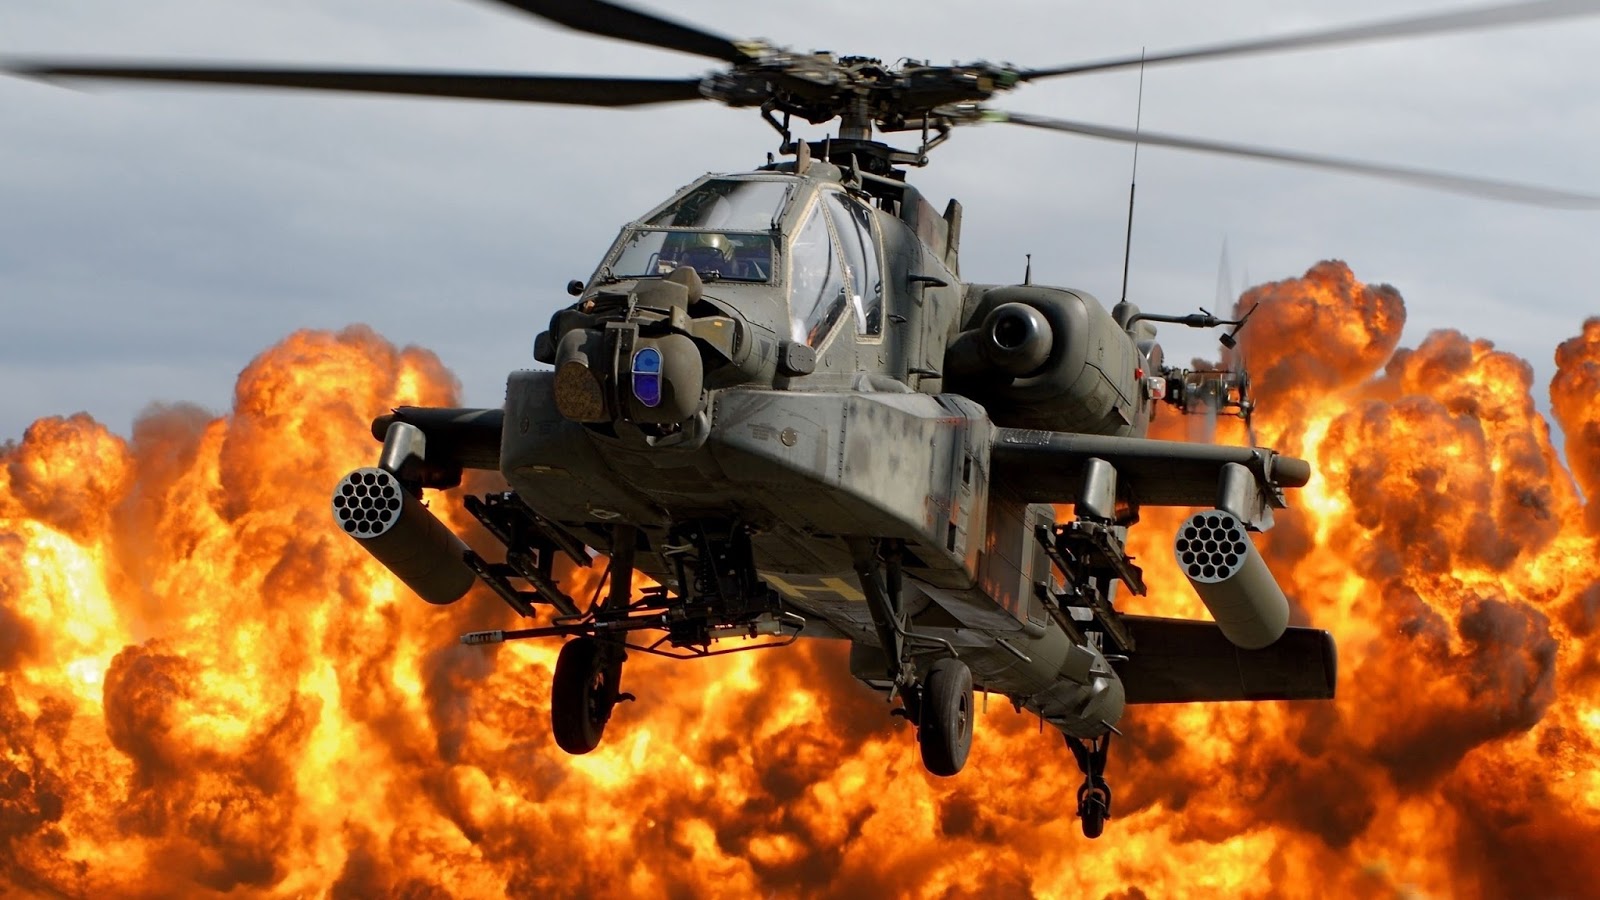 HD Wallpaper 1080p Helicopter Image Military Airplanes